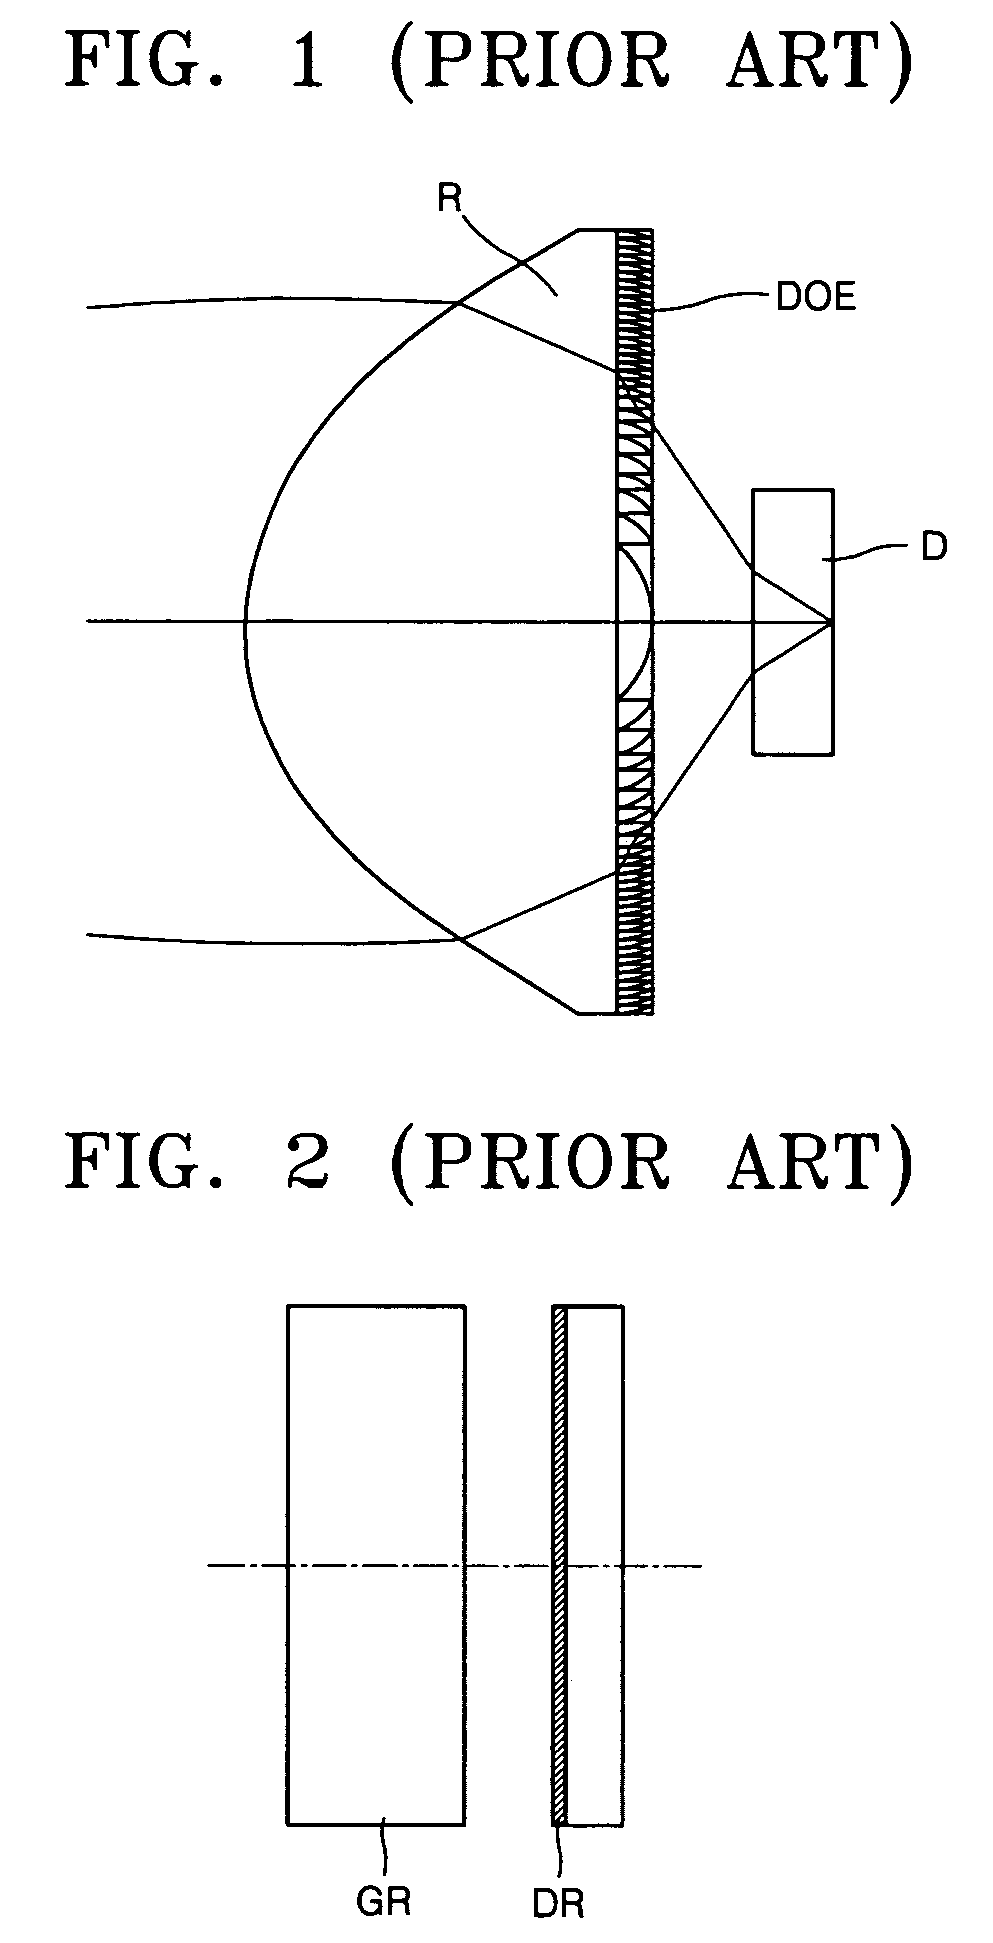 Objective optical system employing grin lens